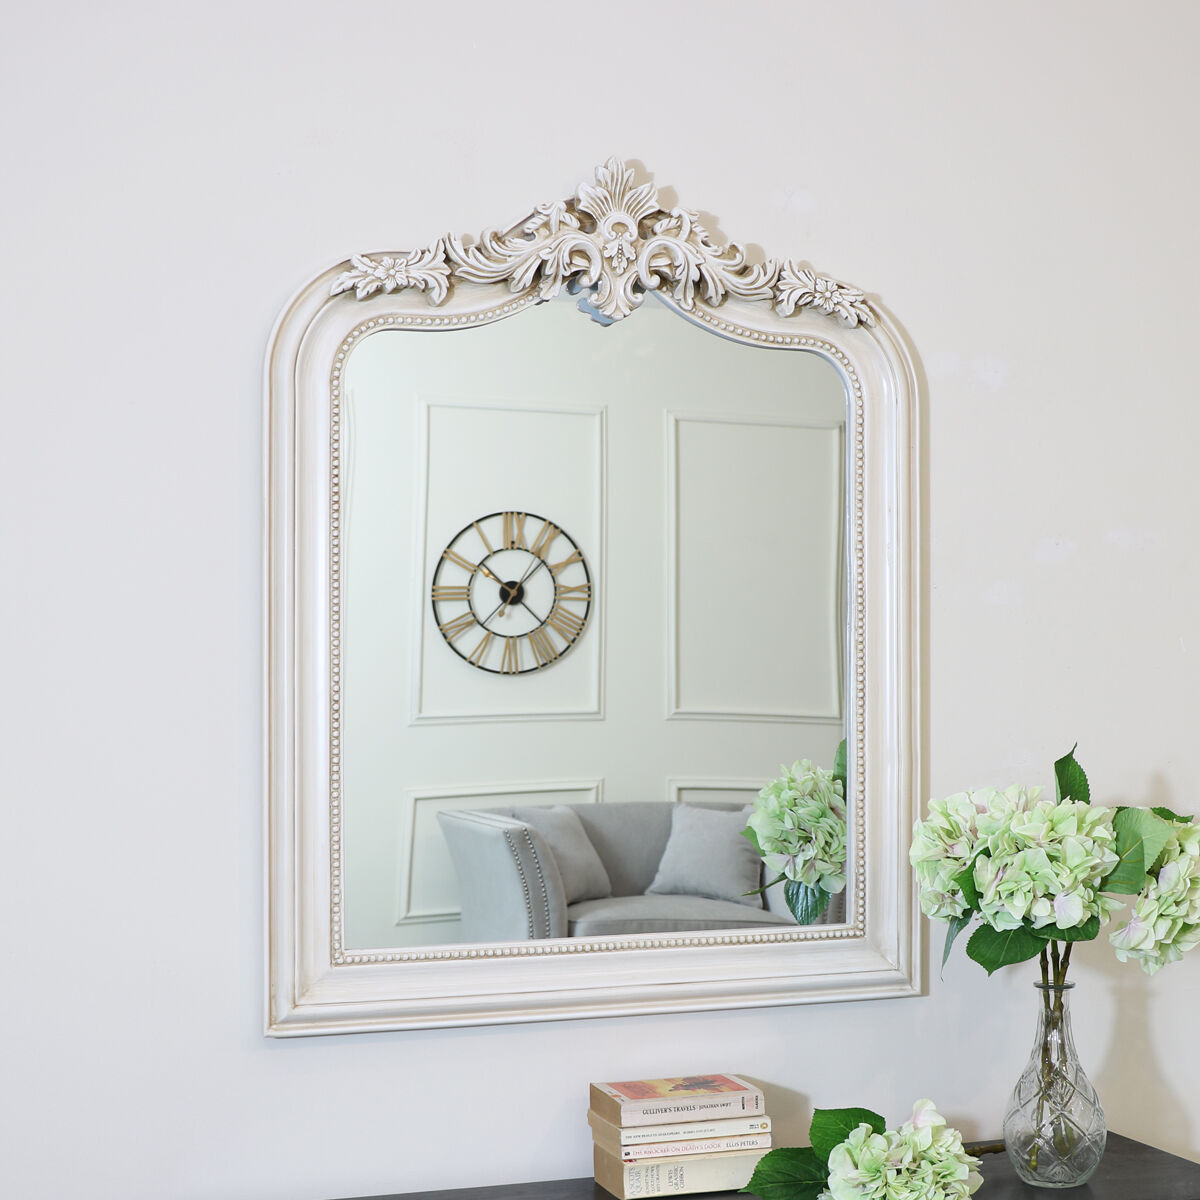 Ornate Arched Antiqued Ivory Wall Mirror 100 cm x 80cm Material: Wood / Resin / Glass